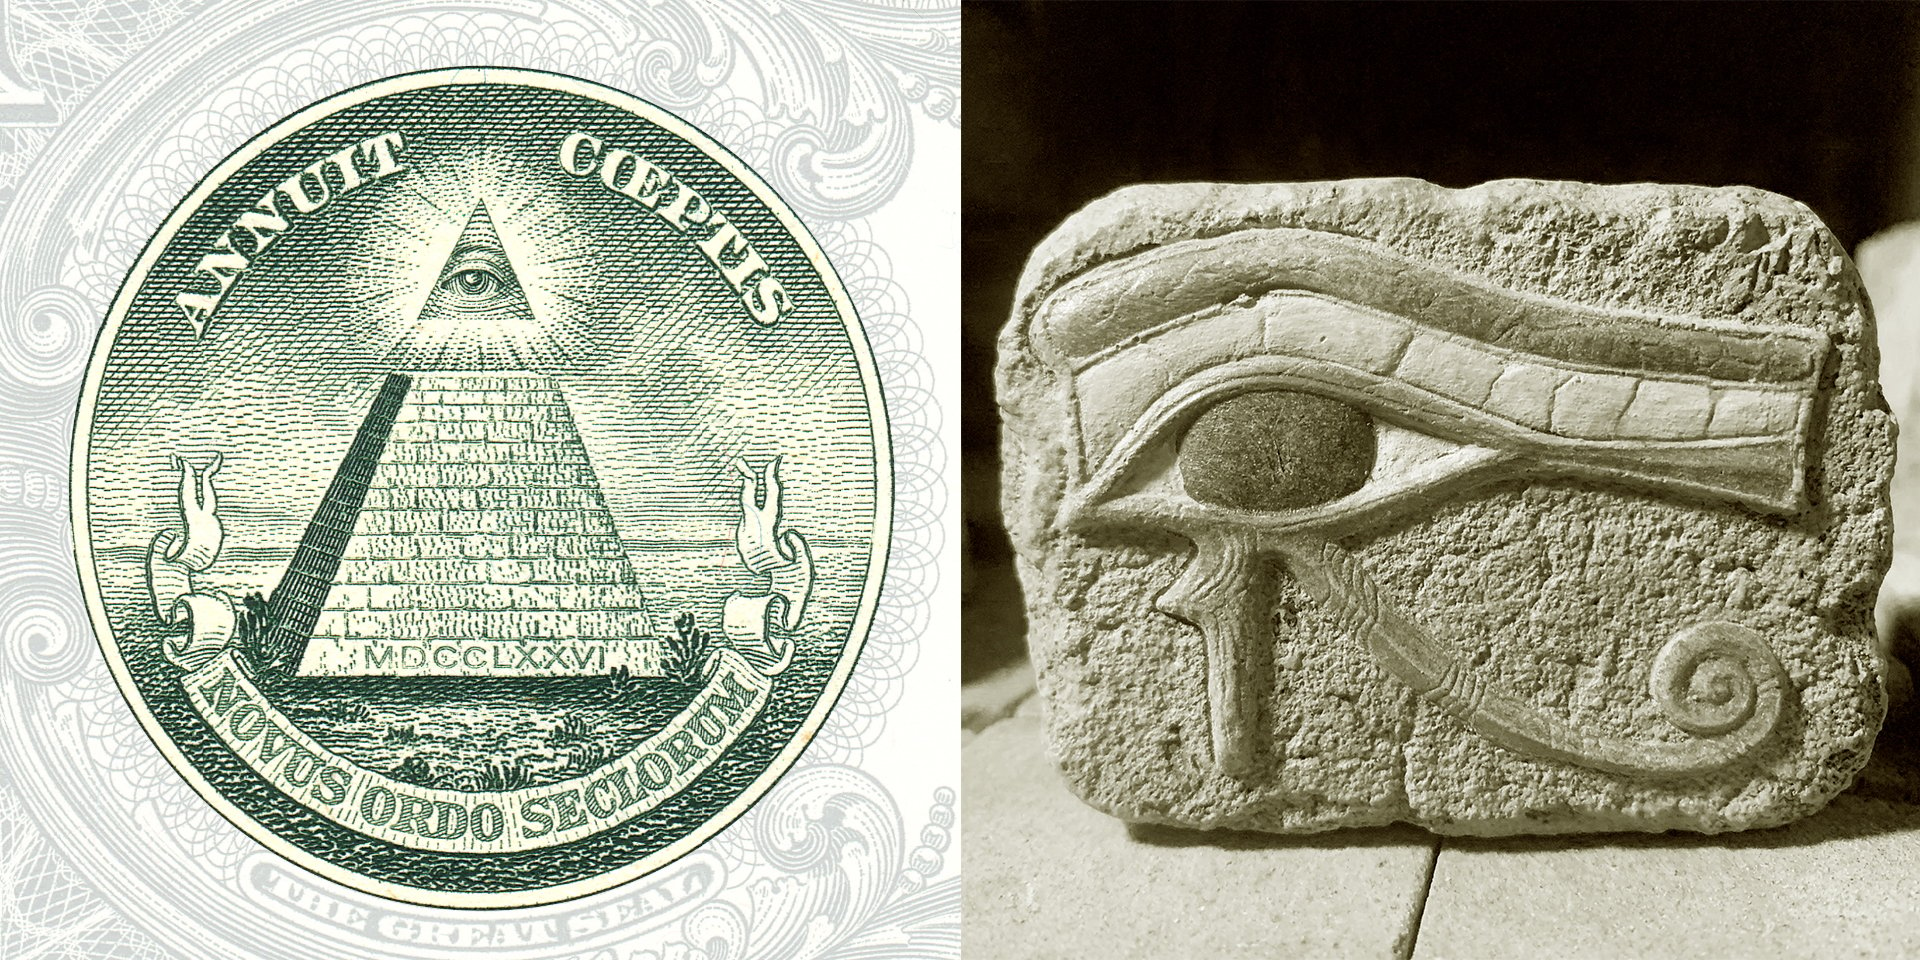 The collage is a combination of two images that show different symbols of the eye. The image on the left is an illustration of the Eye of Providence, as it appears on the US one dollar bill. The image on the right is a photo of a section of an ancient wall relief featuring the Eye of Horus.